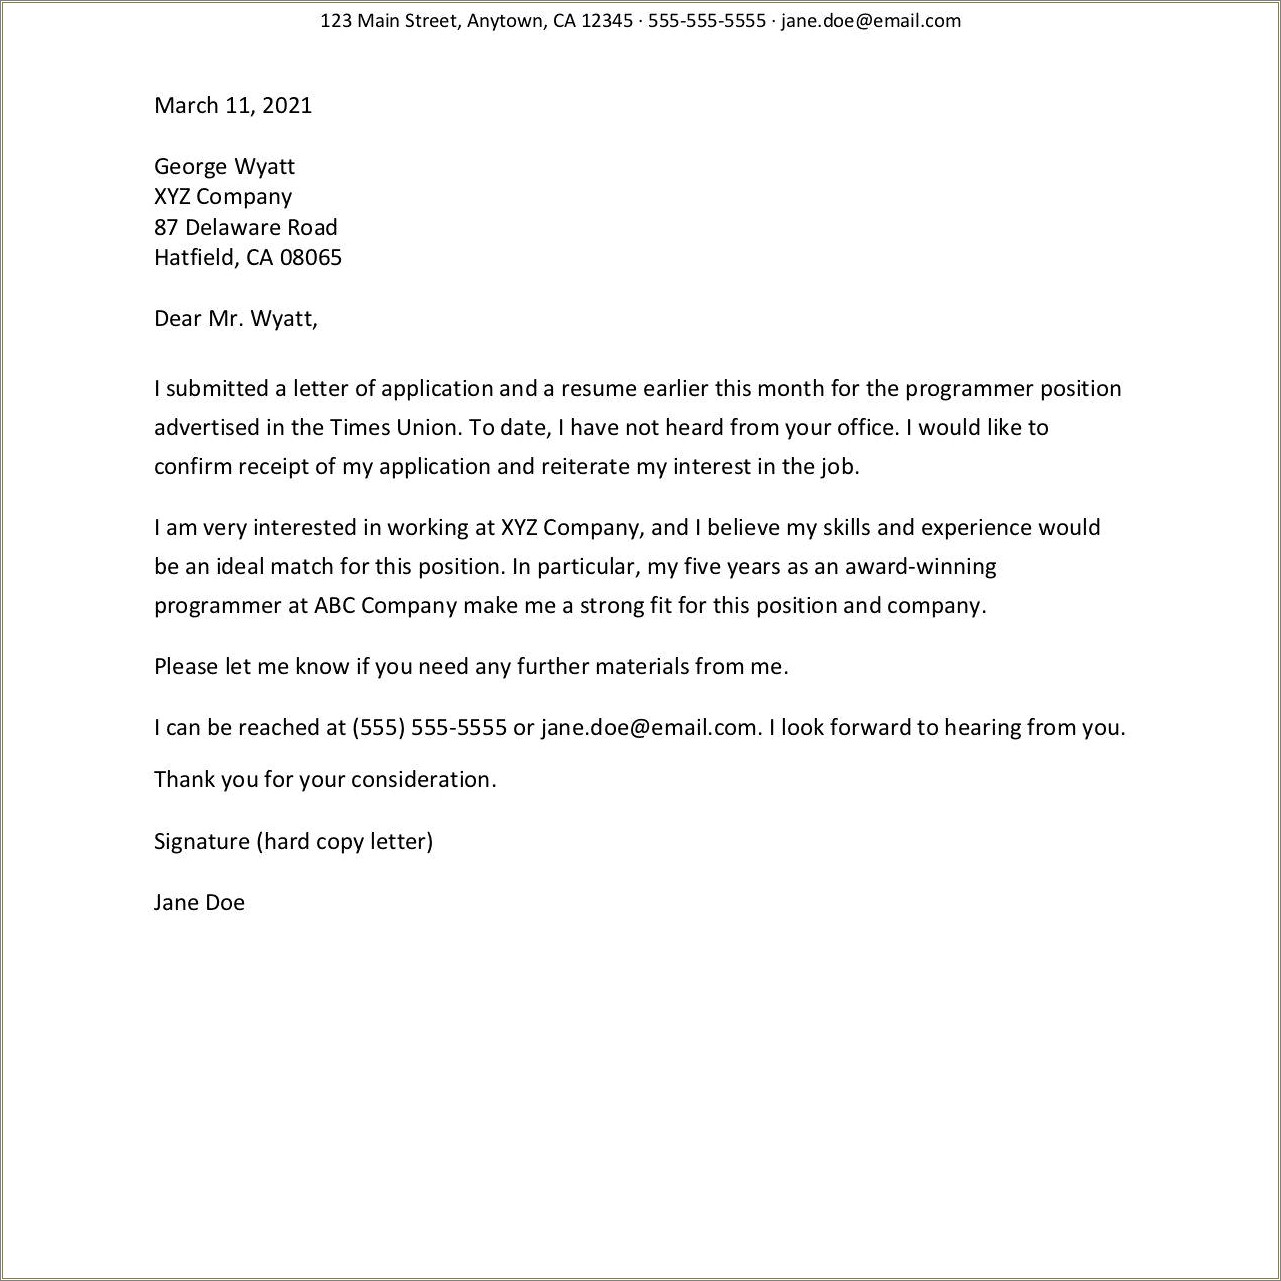 Follow Up Letter After Submitting Resume